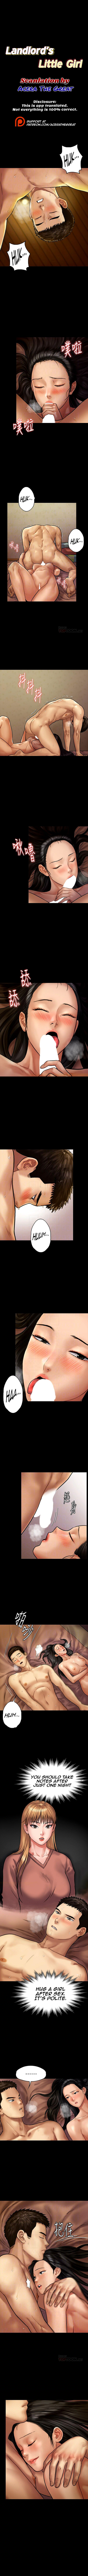 Panel Image 1 for chapter 128 of manhwa Queen Bee on read.oppai.stream